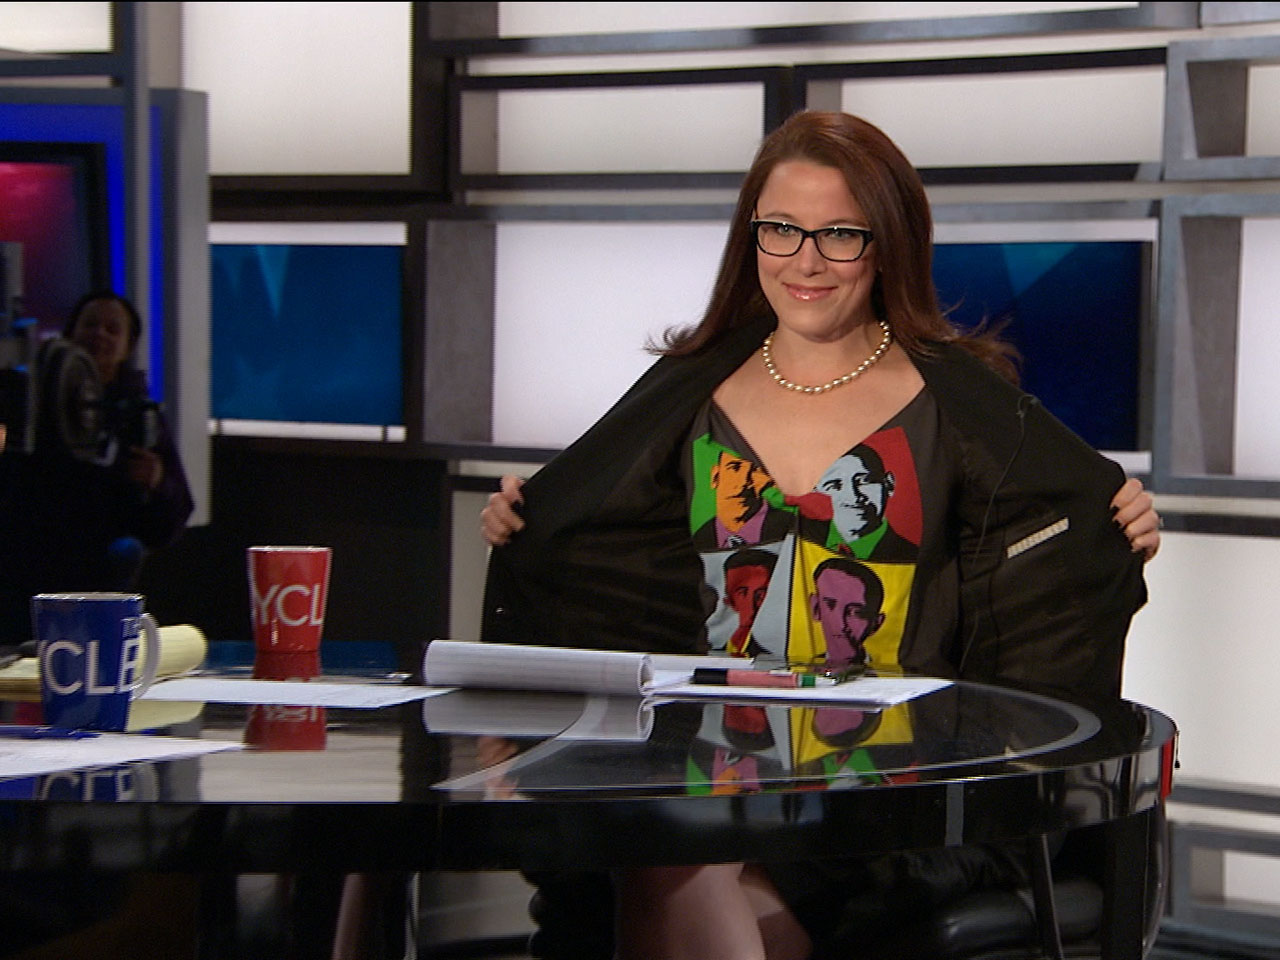 Cycle host S.E. Cupp is leaving MSNBC, and to honor her time with the netwo...